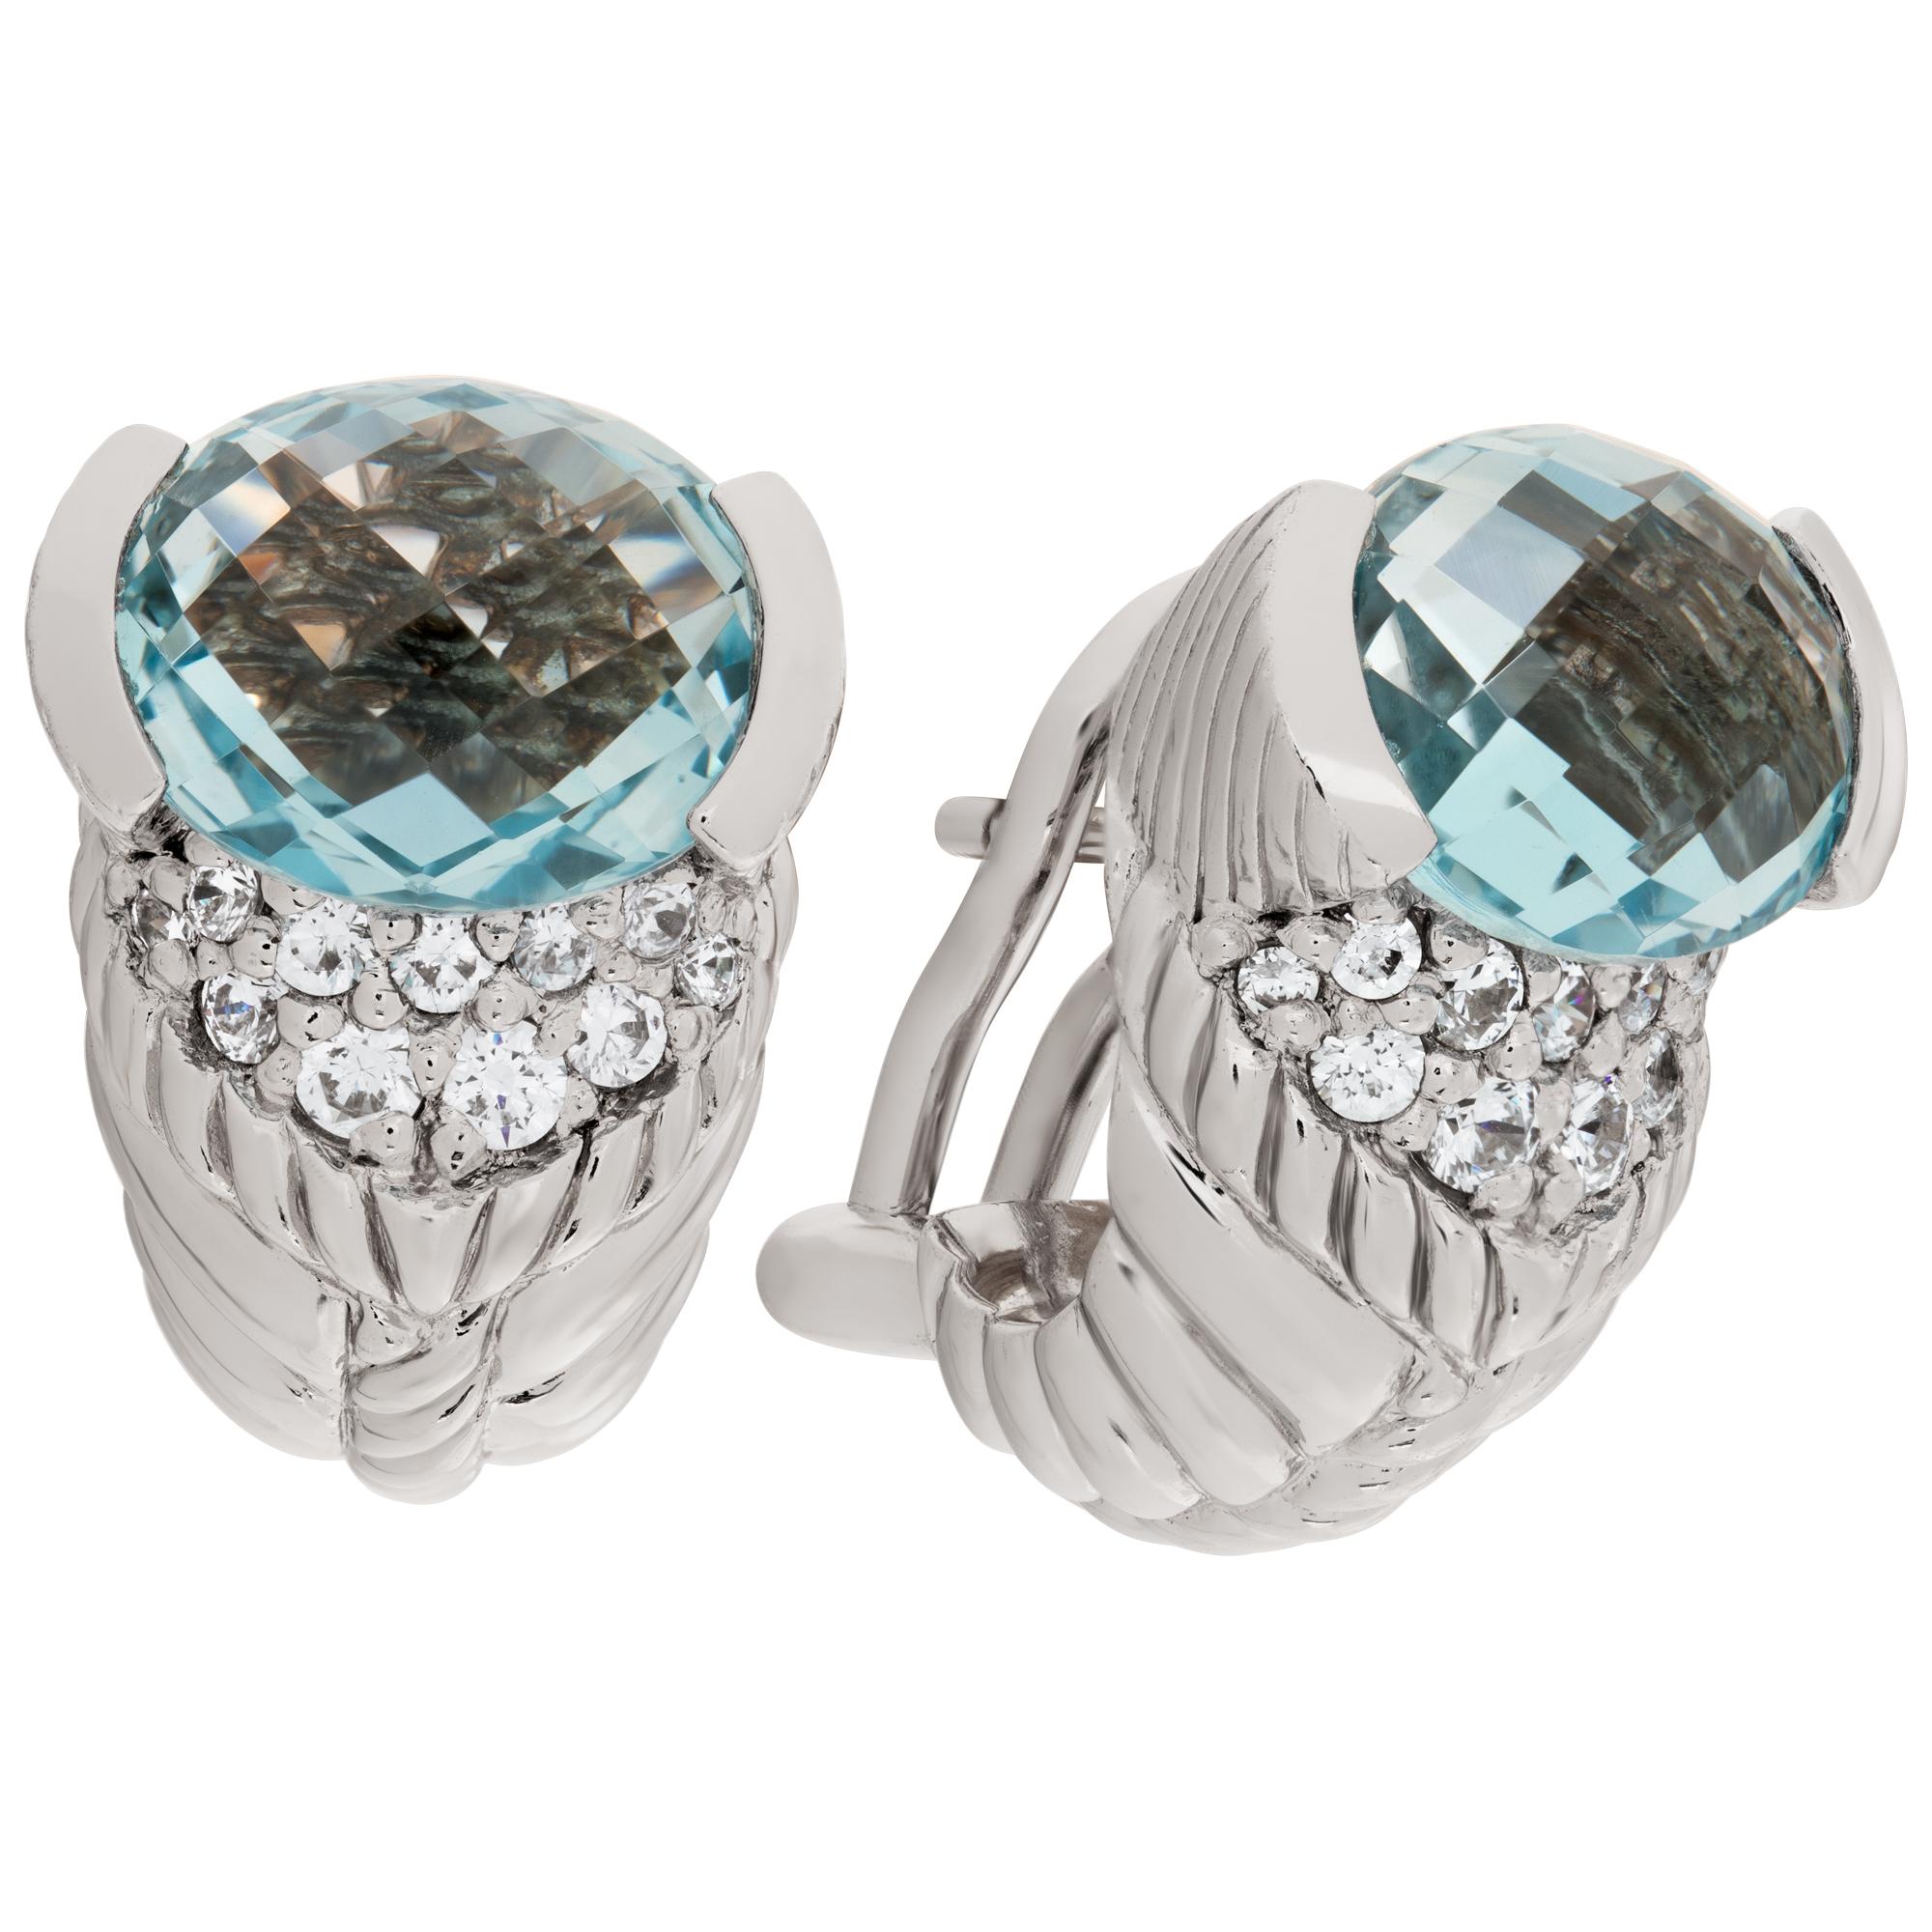 Judith Ripka earrings in sterling silver with blue topaz and cz accents. Hanging length 20 mm.
